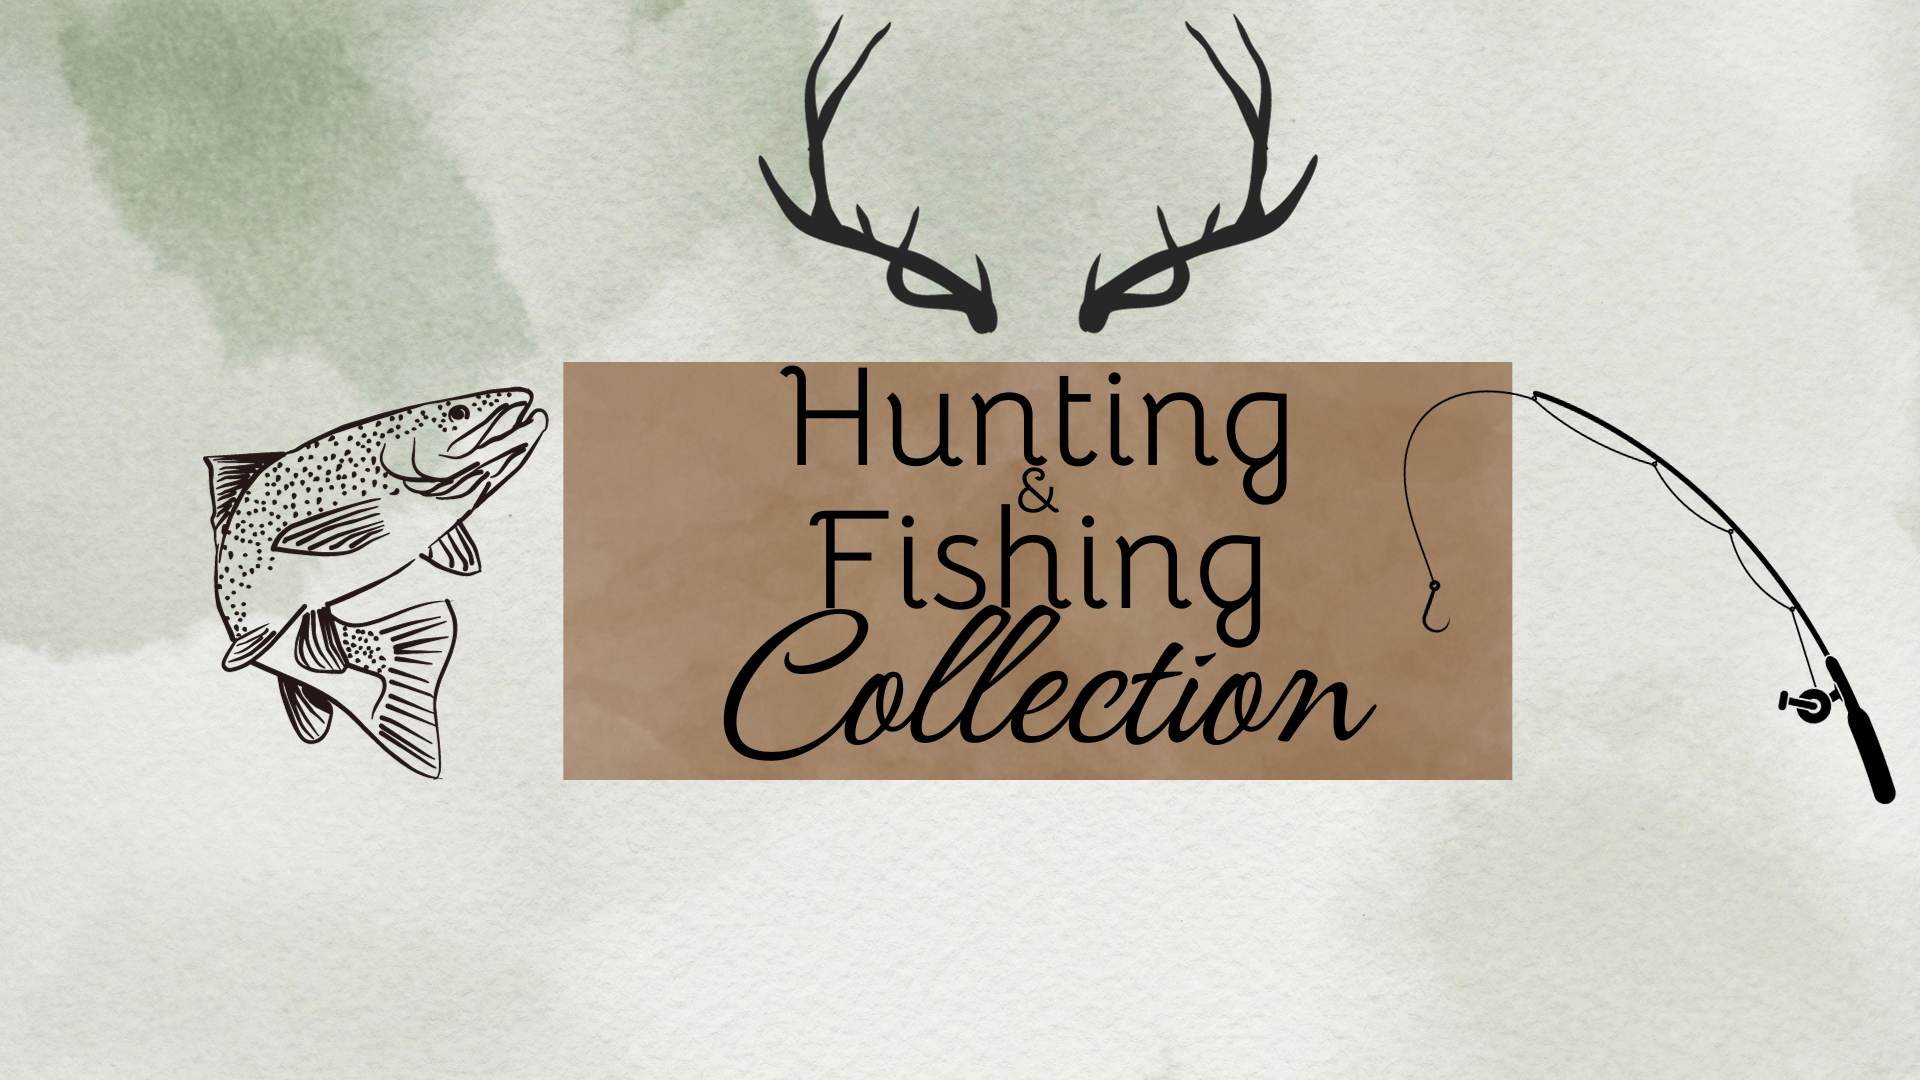 Hunting and Fishing collection